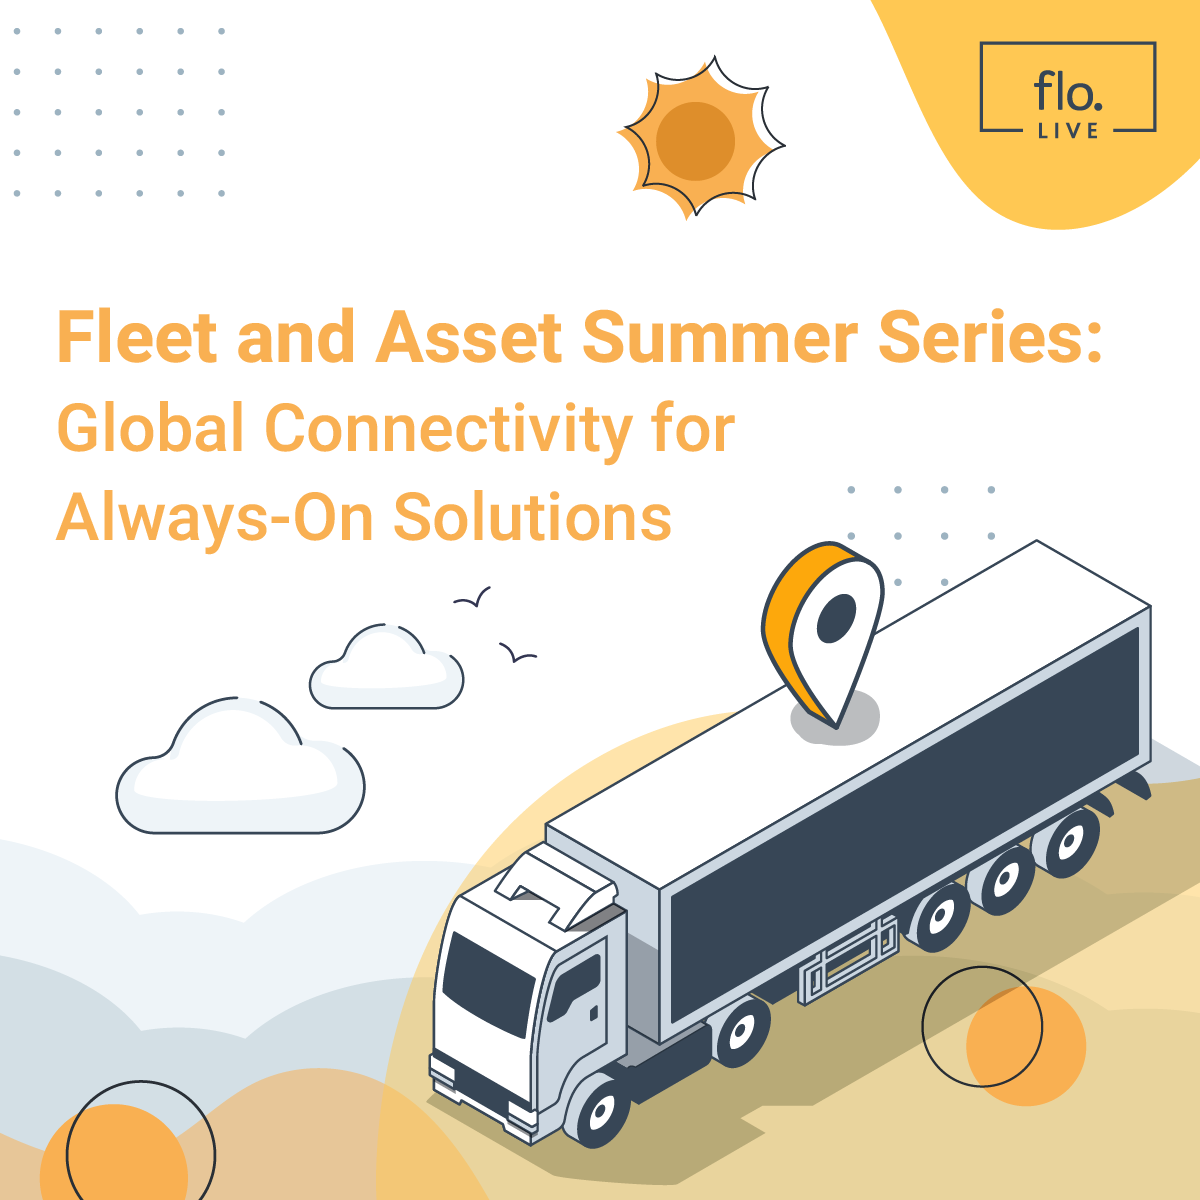 Global Connectivity for Always-On Solutions image